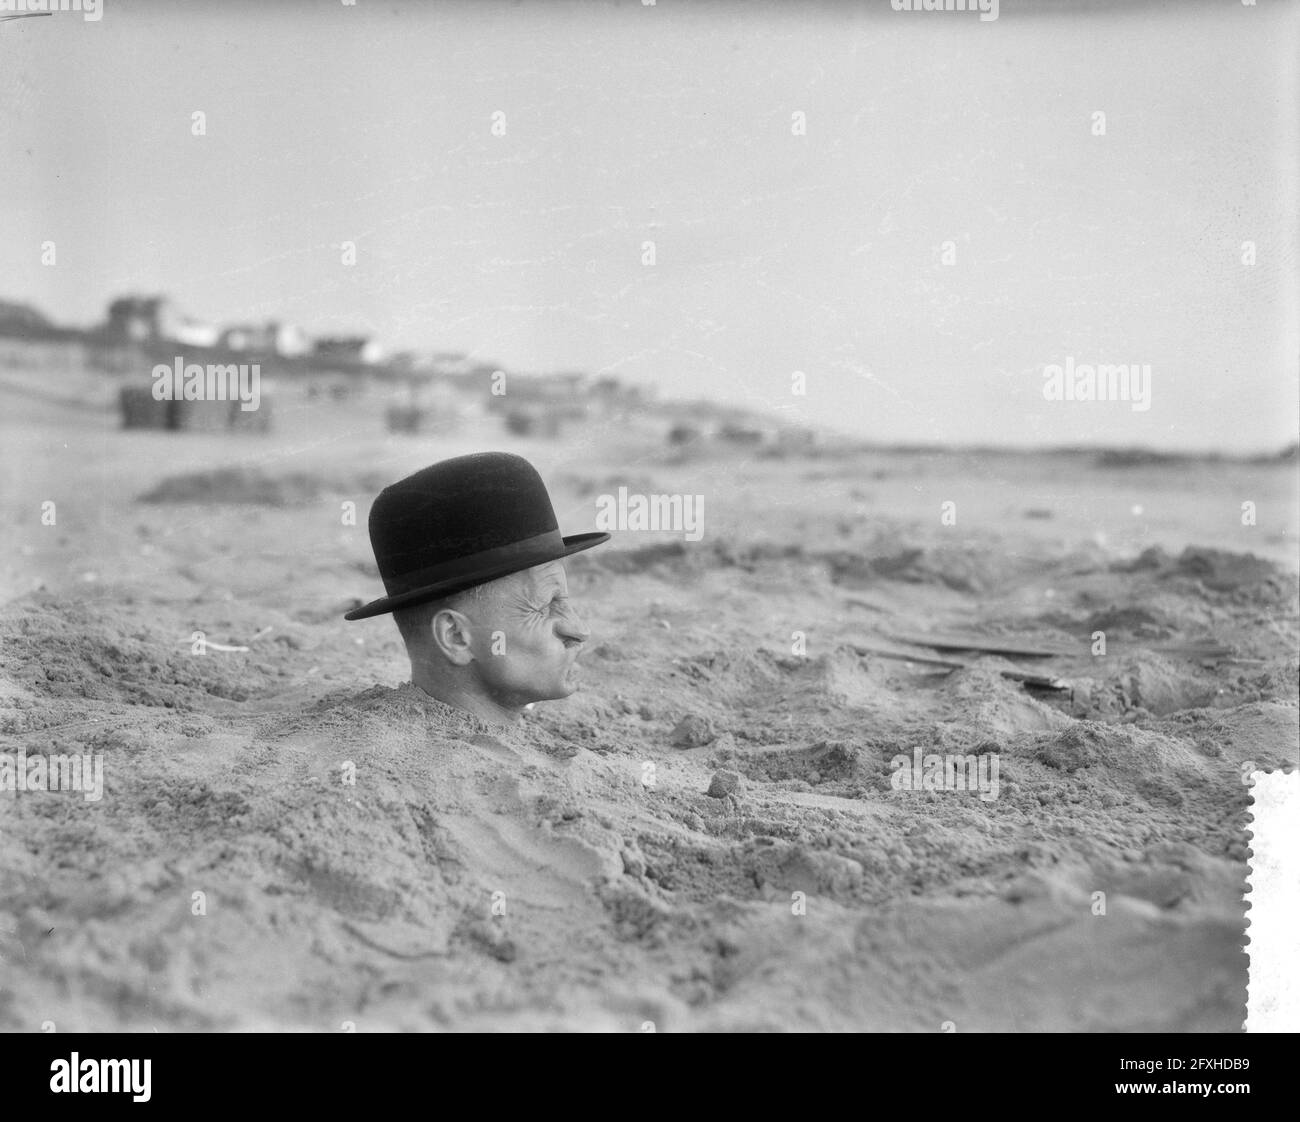 Strange situation on the Dutch beach, man with whole body in the sand, May 25, 1959, The Netherlands, 20th century press agency photo, news to remember, documentary, historic photography 1945-1990, visual stories, human history of the Twentieth Century, capturing moments in time Stock Photo